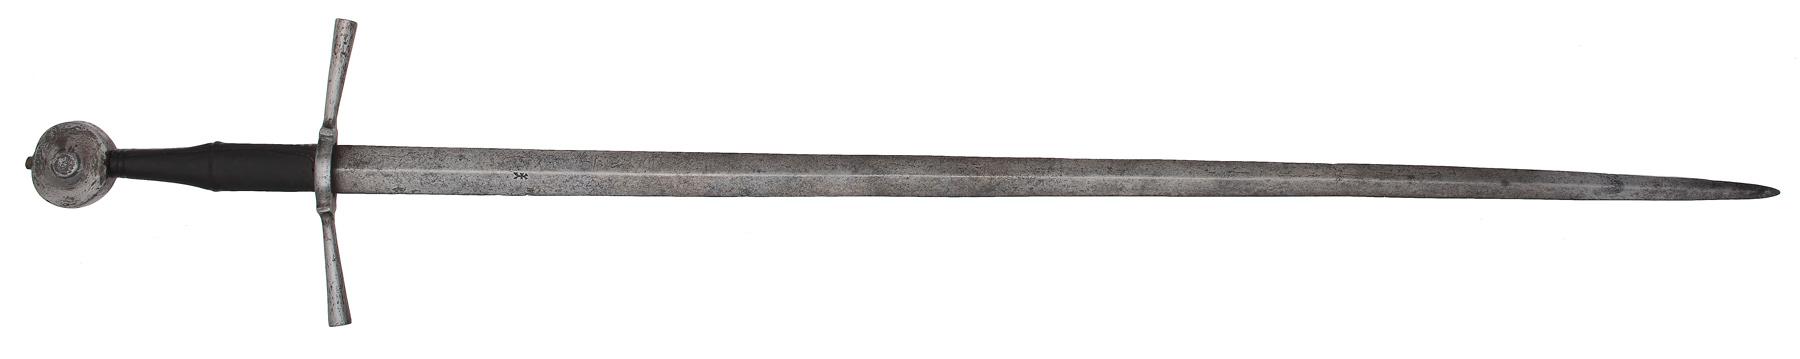 Late Medieval Continental Hand-and-Half Sword